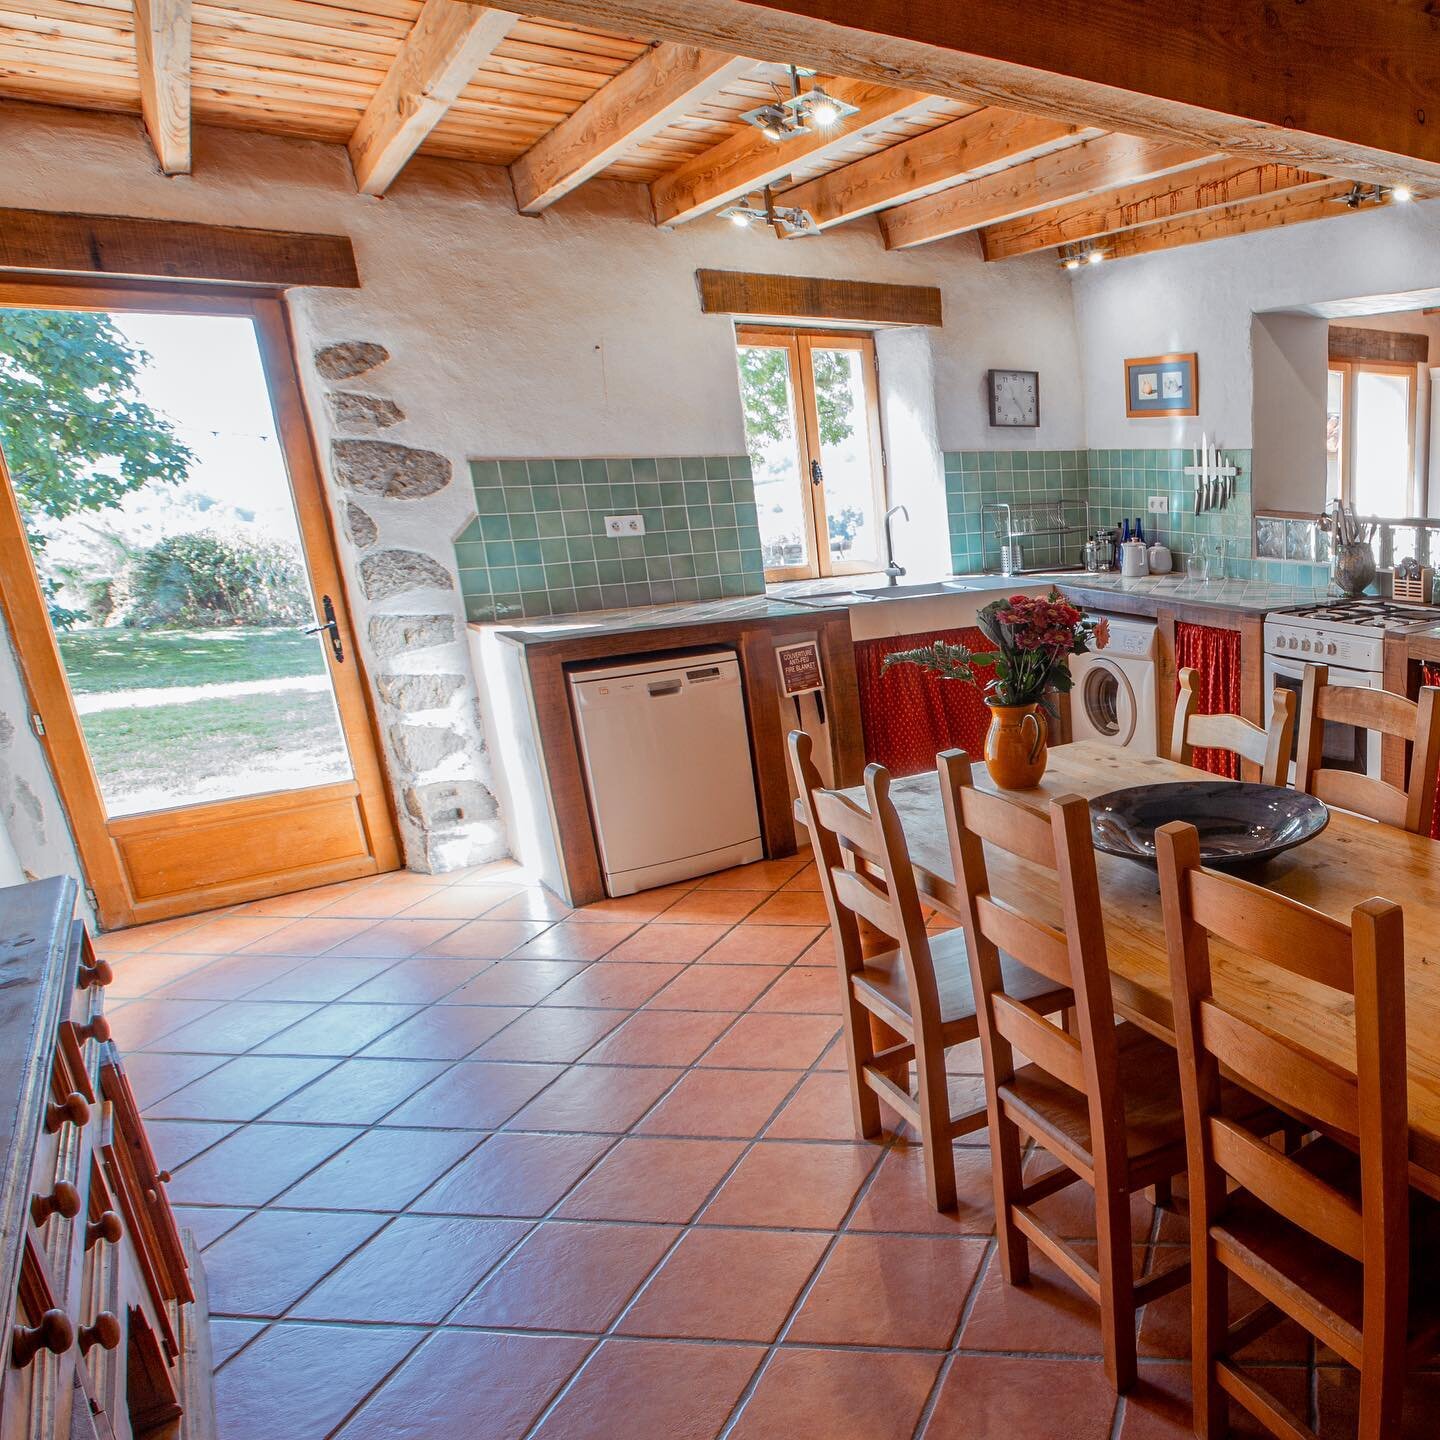 Relax with friends and family in La Maison de Louis that accomodates up to 6 people within The Domain of Manzac! 

#FranceTravel #TravelFrance #VisitFrance #InstaFrance #FranceGram #FrenchExperience #FranceVacations #BeautifulDestinations #TravelGoal